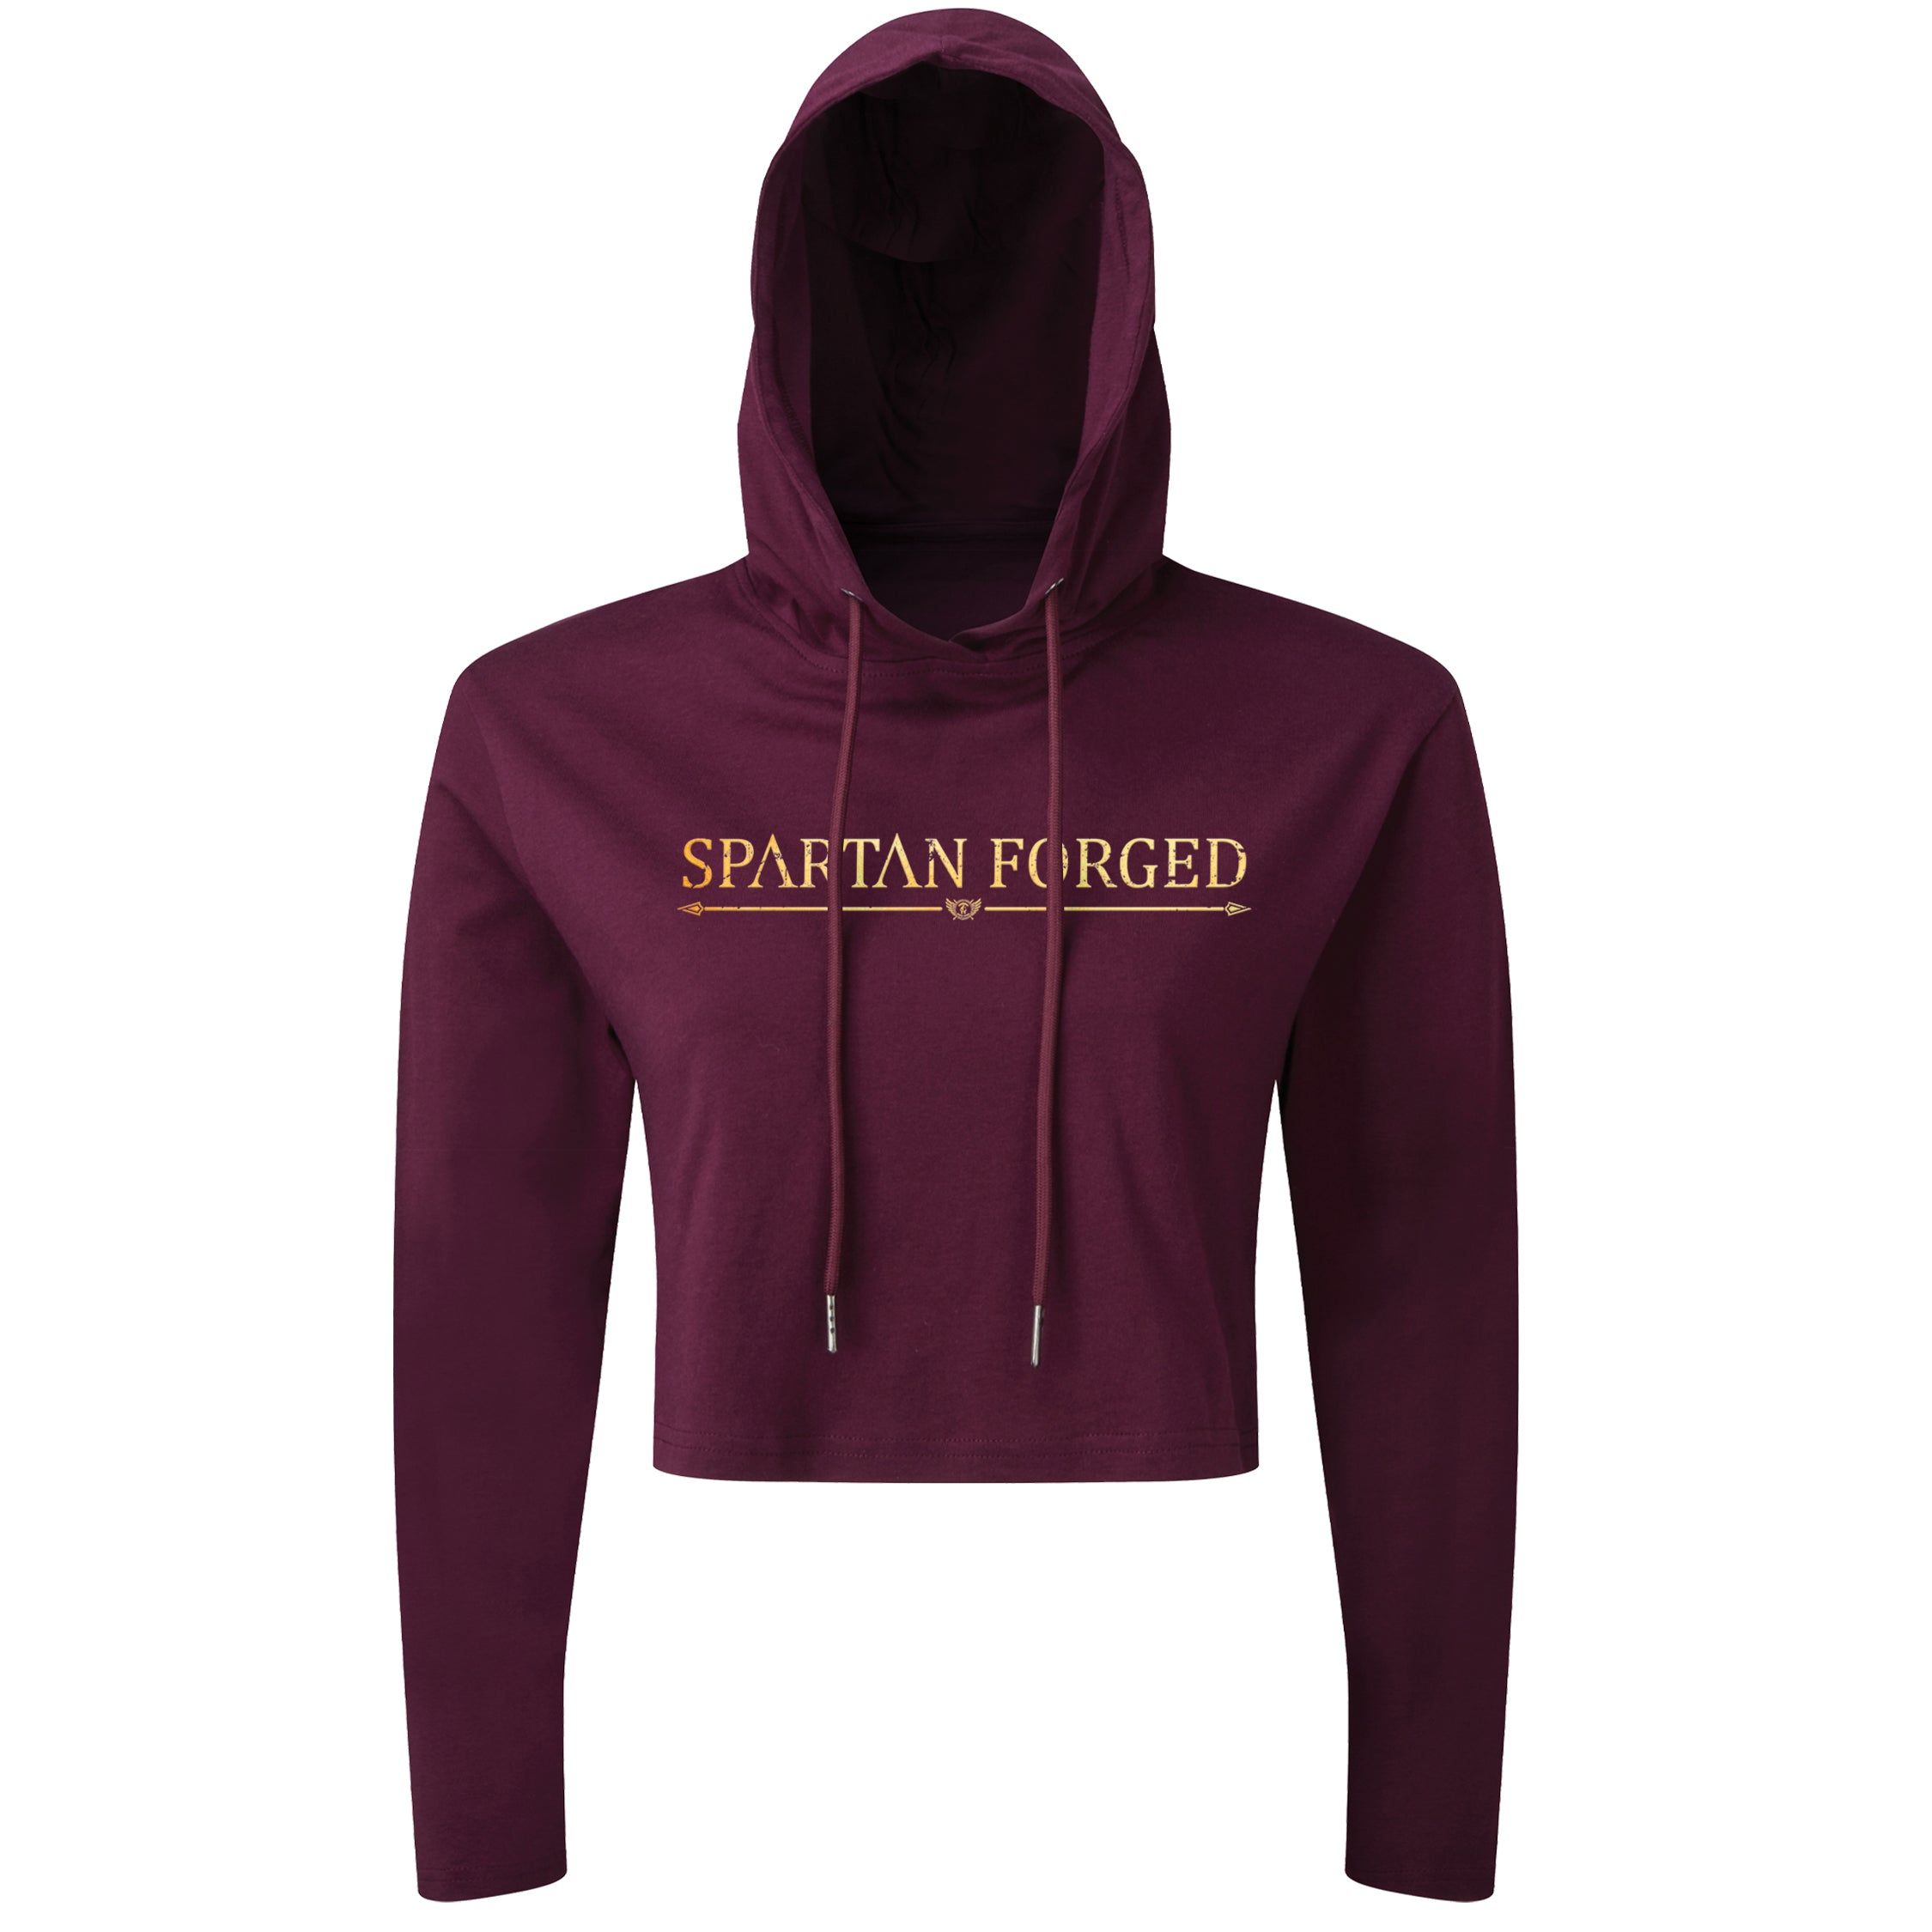 Spartan Forged Gold - Spartan Forged - Cropped Hoodie